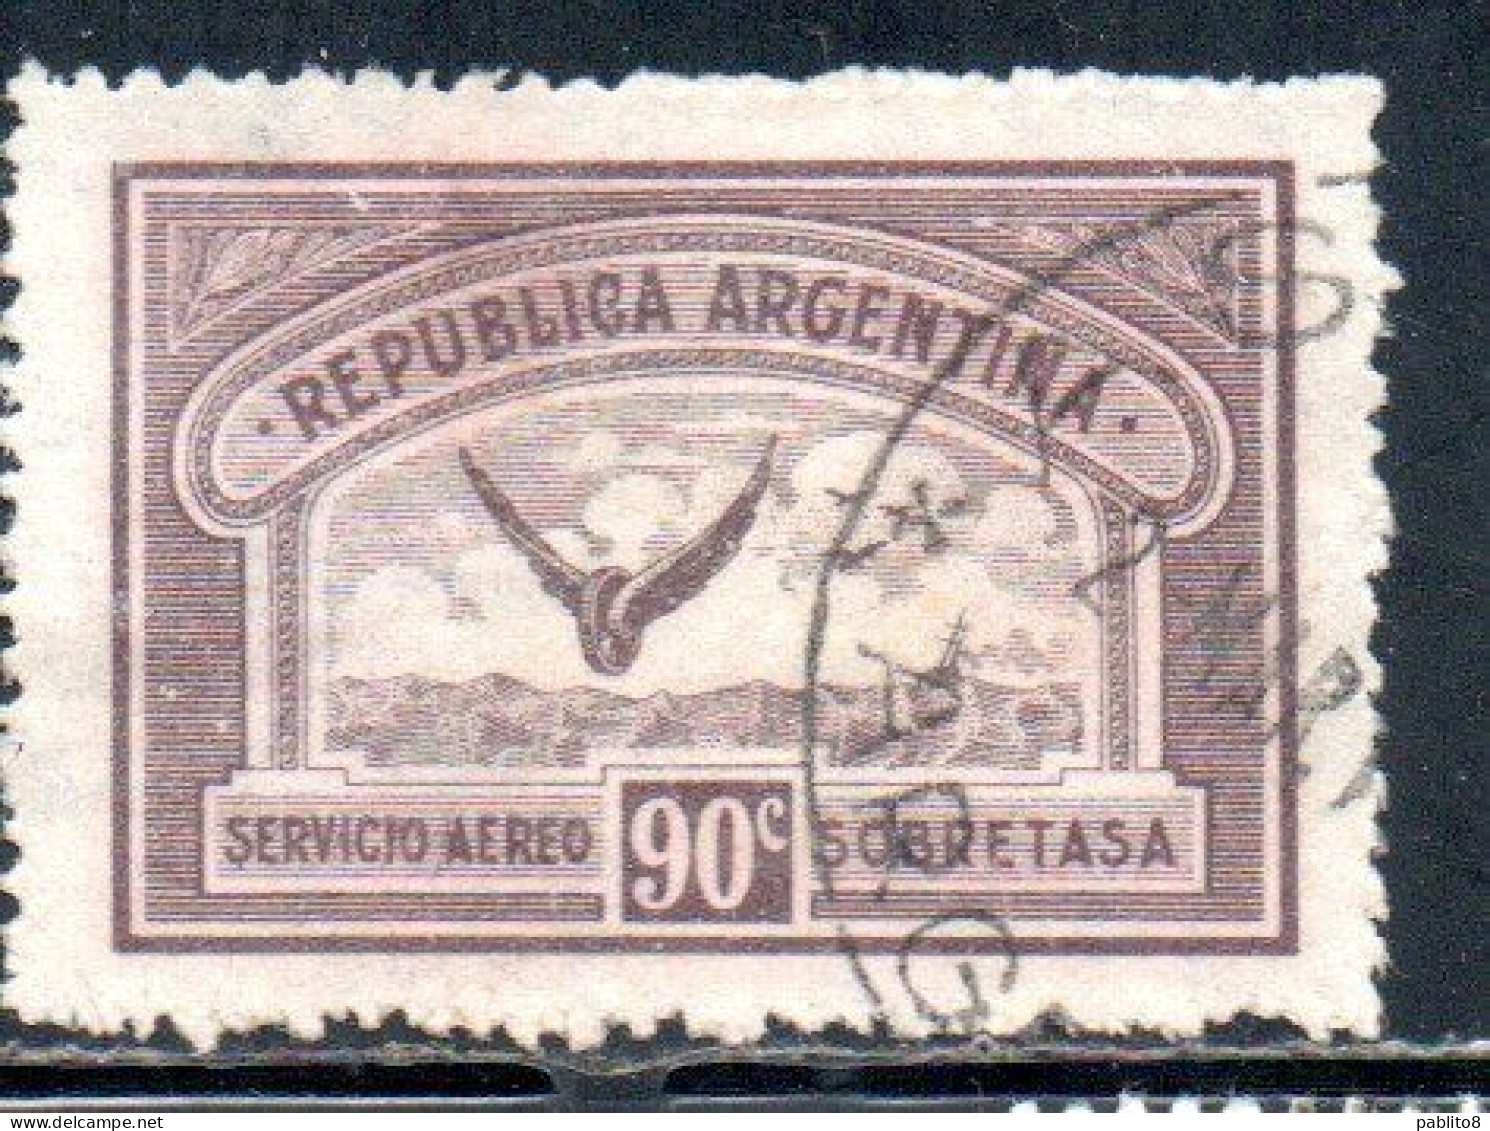 ARGENTINA 1928 AIR POST MAIL CORREO AEREO AIRMAIL WINGS CROSS THE SEA 90c USED USADO OBLITERE' - Luchtpost